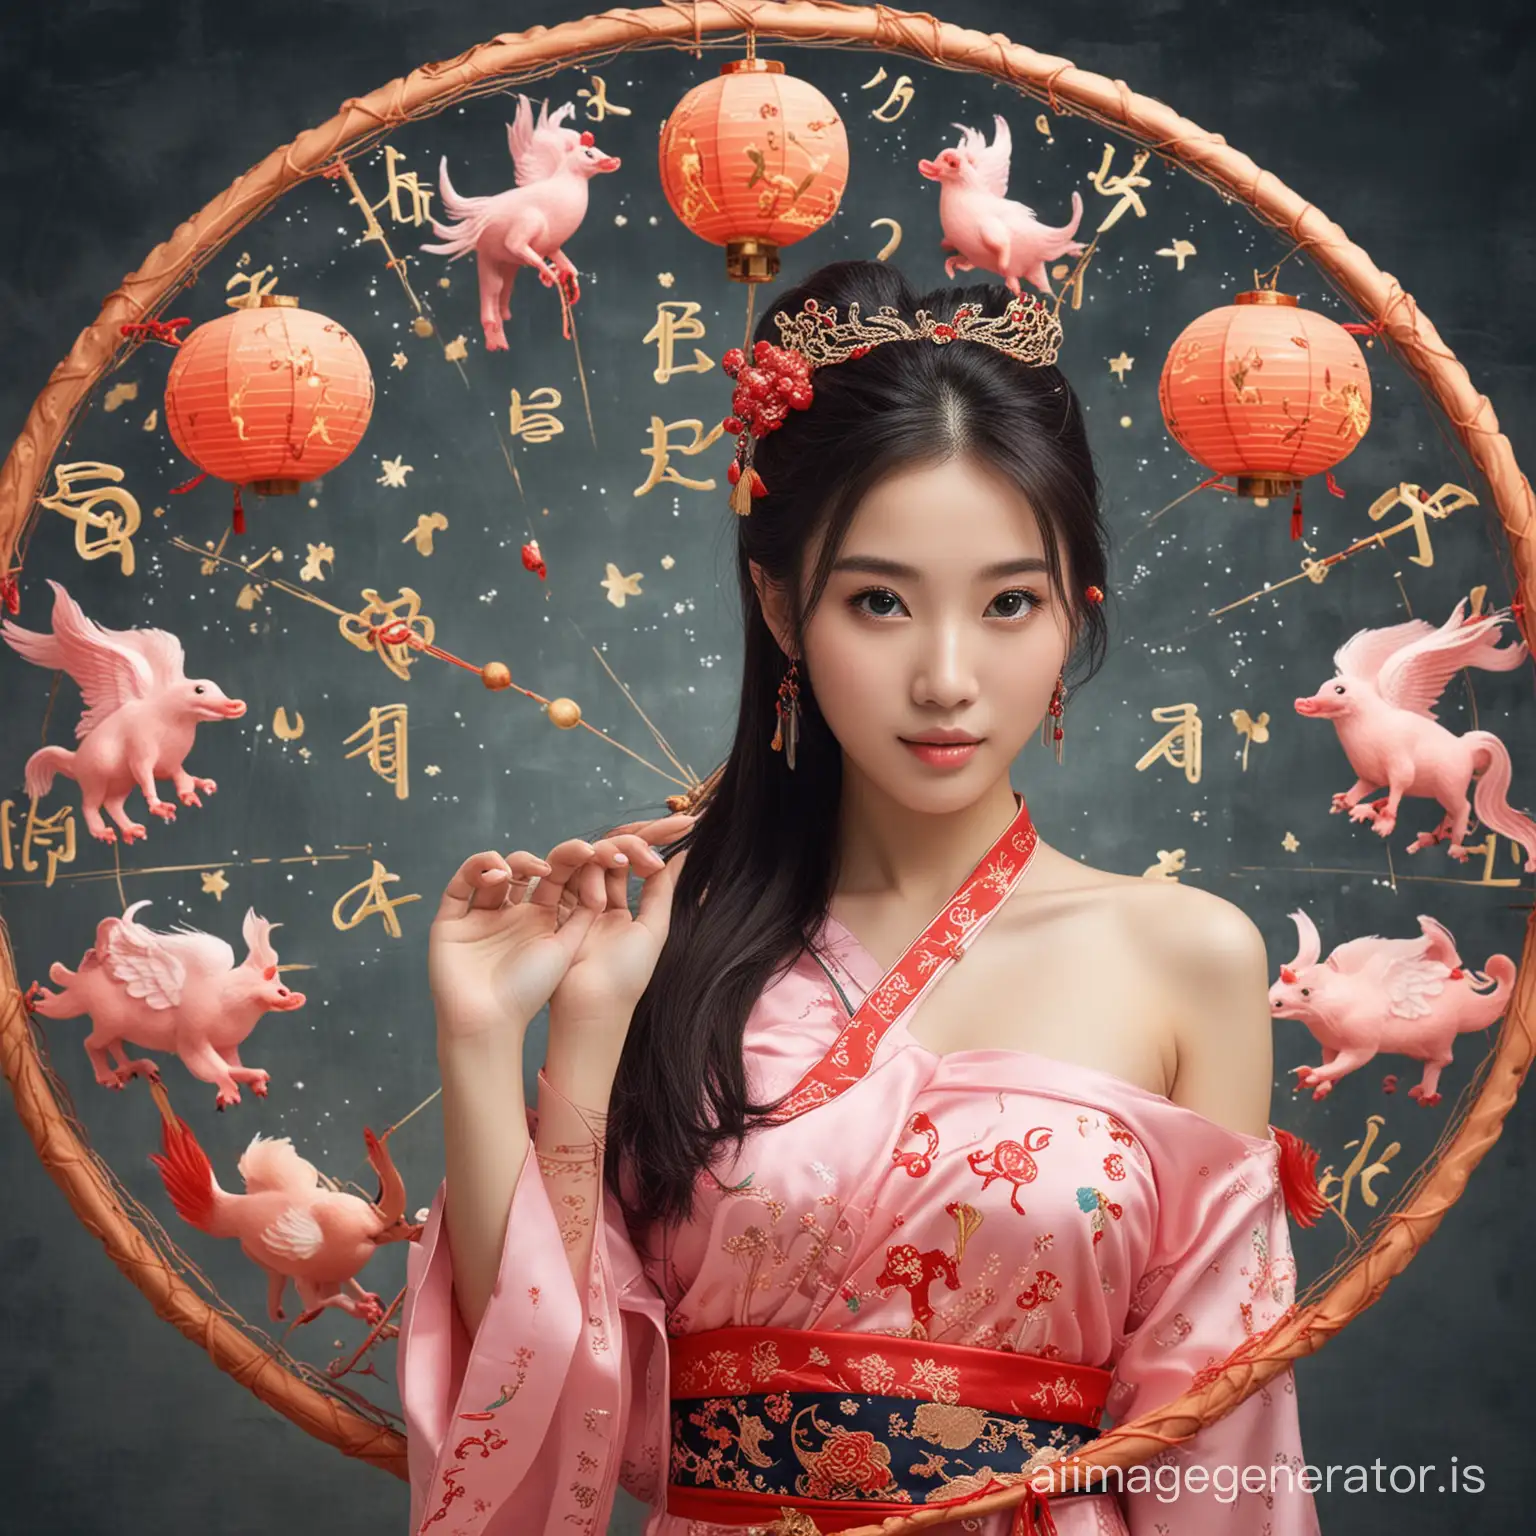 Beautiful-Chinese-Girl-Embracing-the-Symbolism-of-the-12-Zodiac-Signs